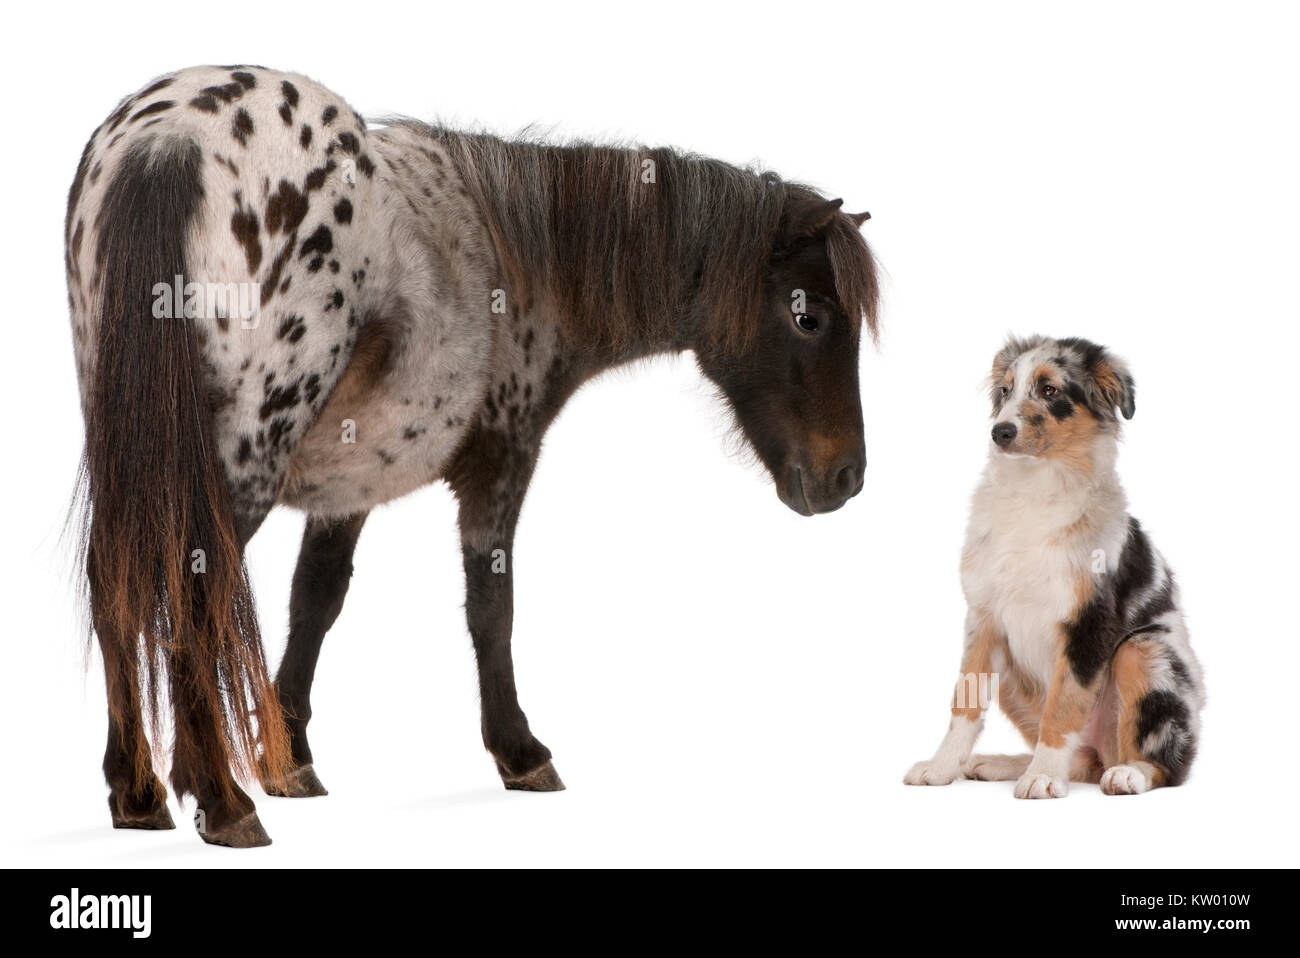 Appaloosa Miniature horse, Equus caballus, 2 years old,  and Australian Shepherd puppy, 4 months old, in front of white background Stock Photo